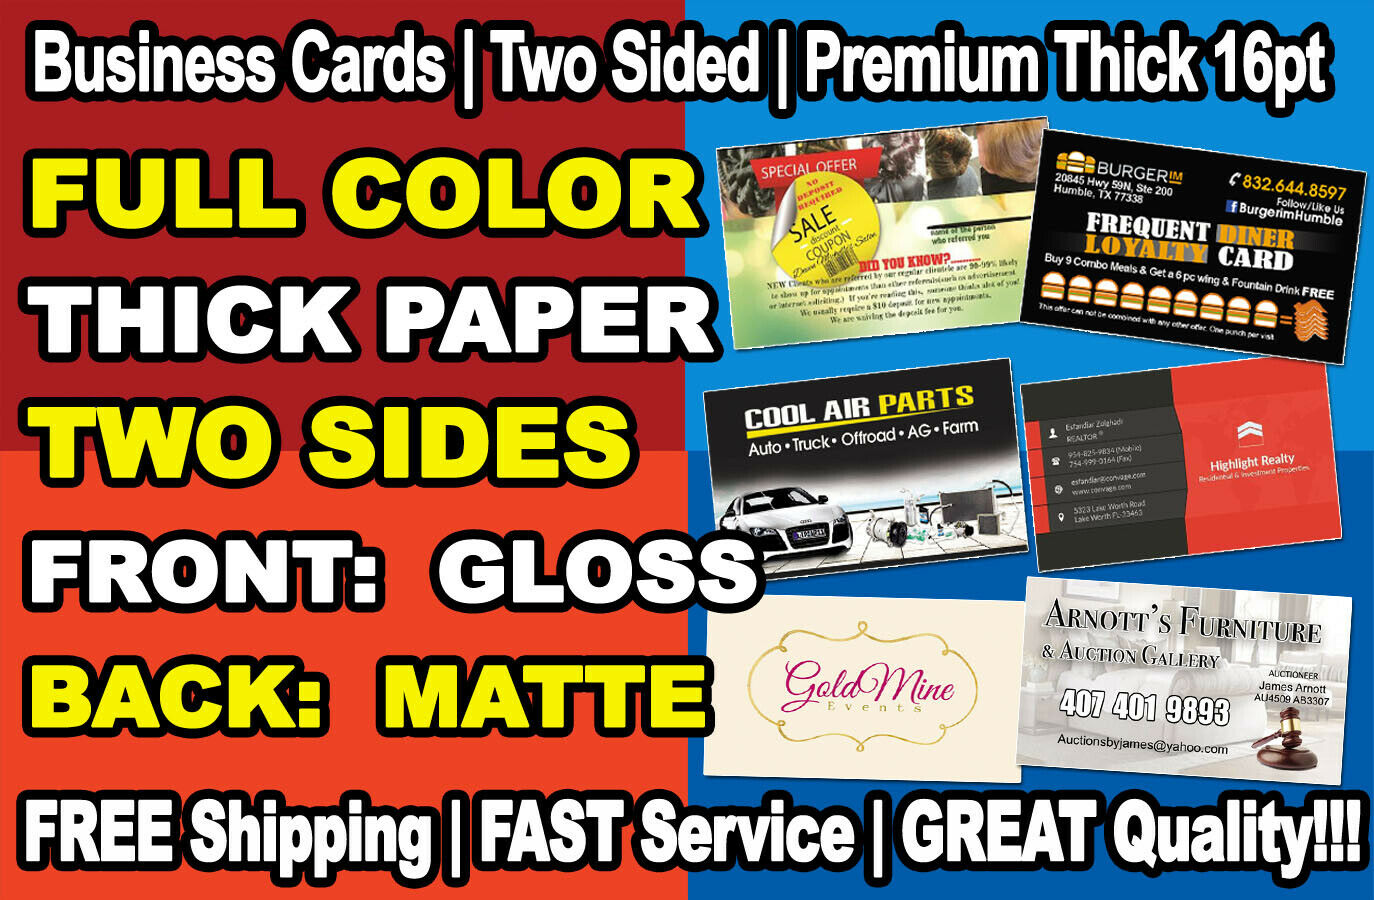 GLOSS & MATTE 5000 Full Color Custom Business Cards - FREE Ship- Printed 2 Sides